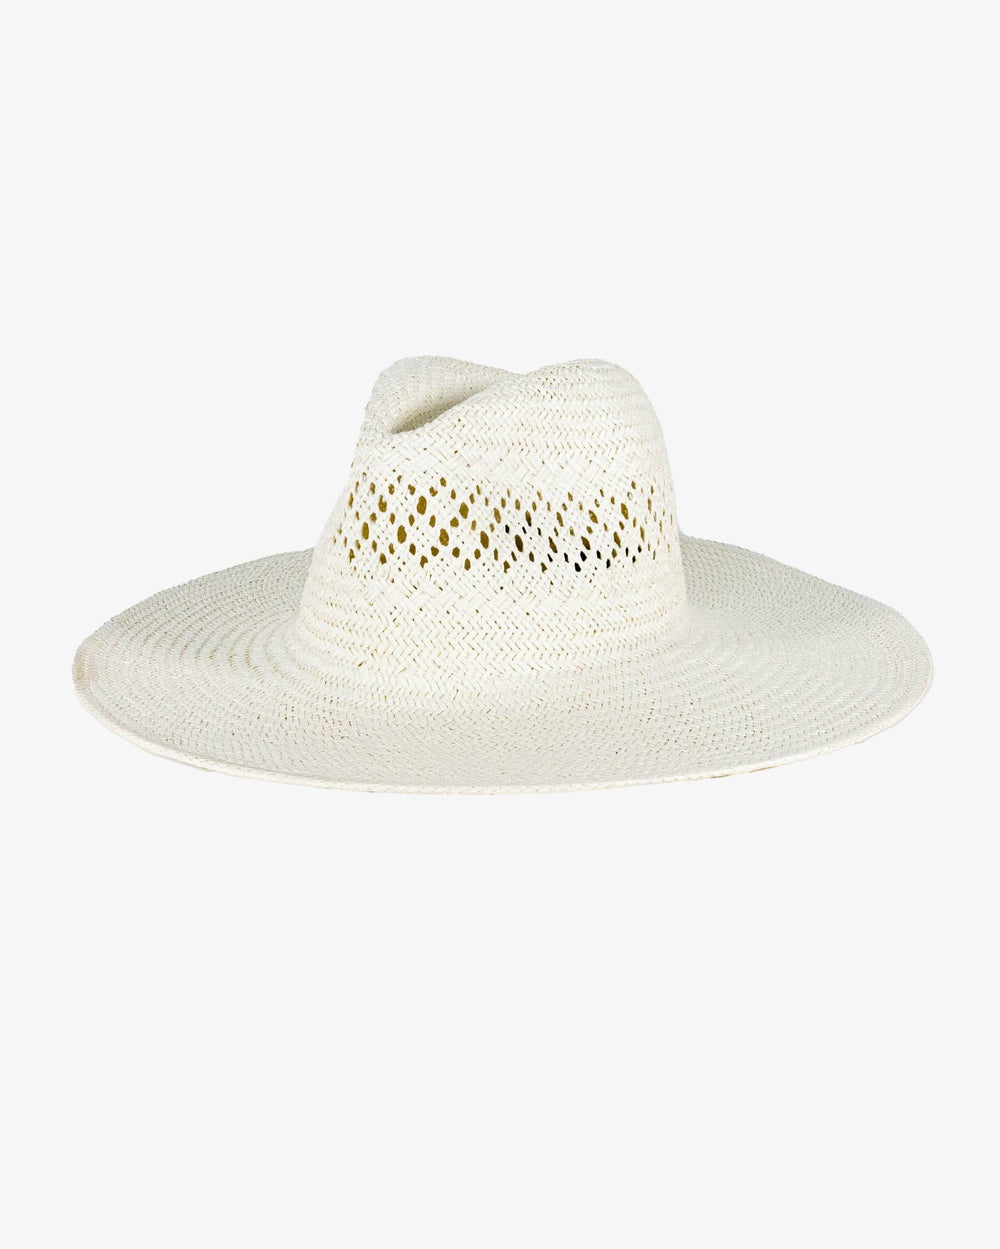 The front view of the Southern Tide Diamond Packable Beach Hat by Southern Tide - White